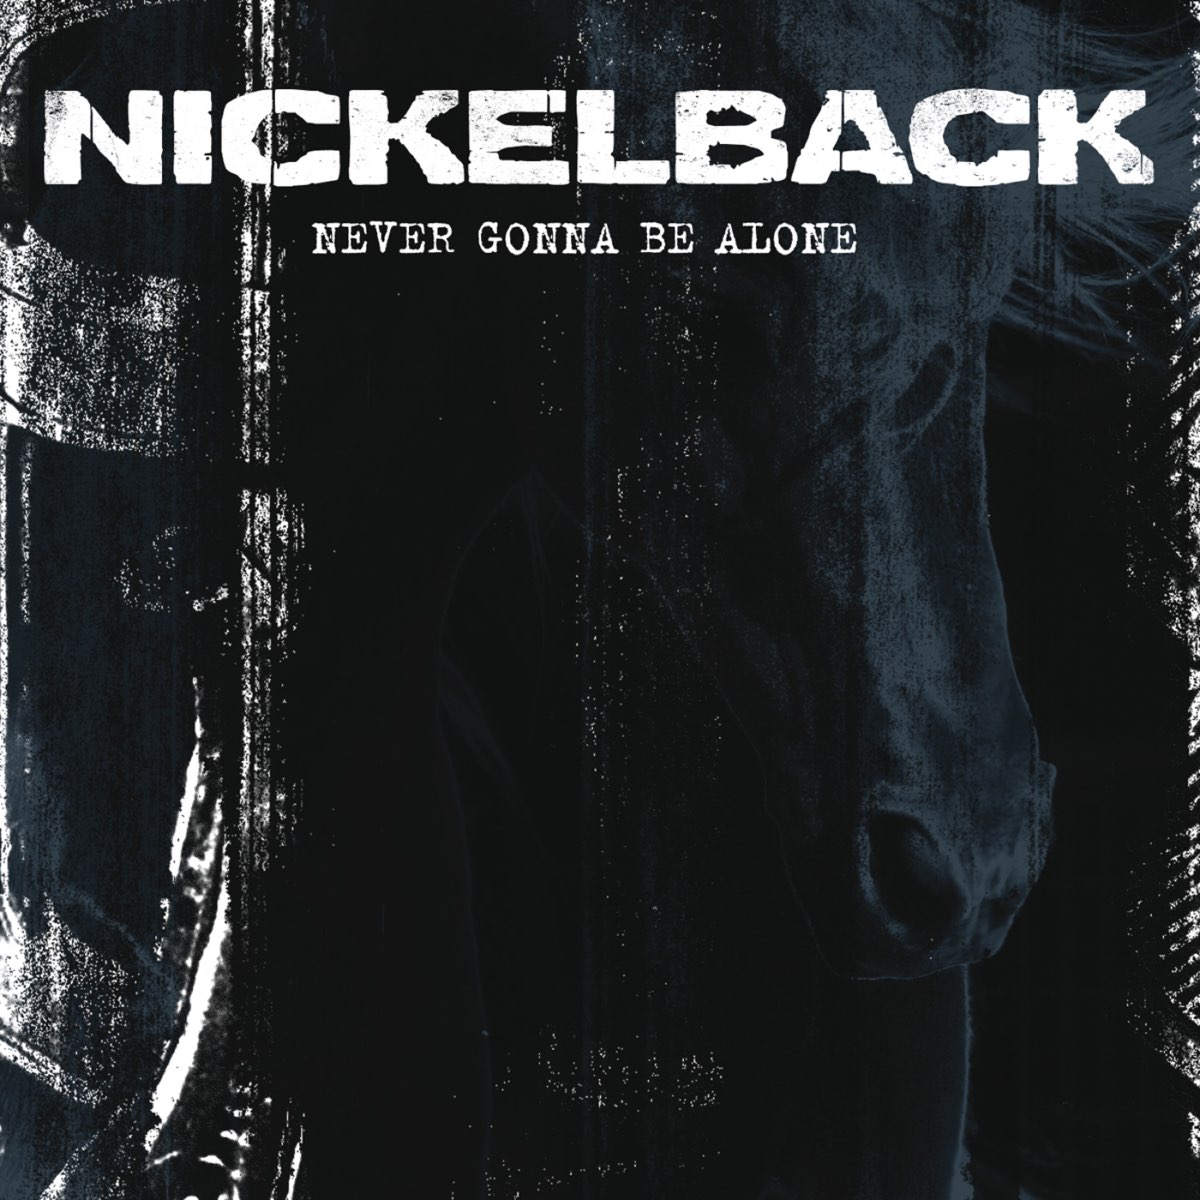 Никельбэк 2008. Never gonna be Alone Nickelback. Nickelback "Dark Horse". Nickelback обложка. Newer be alone